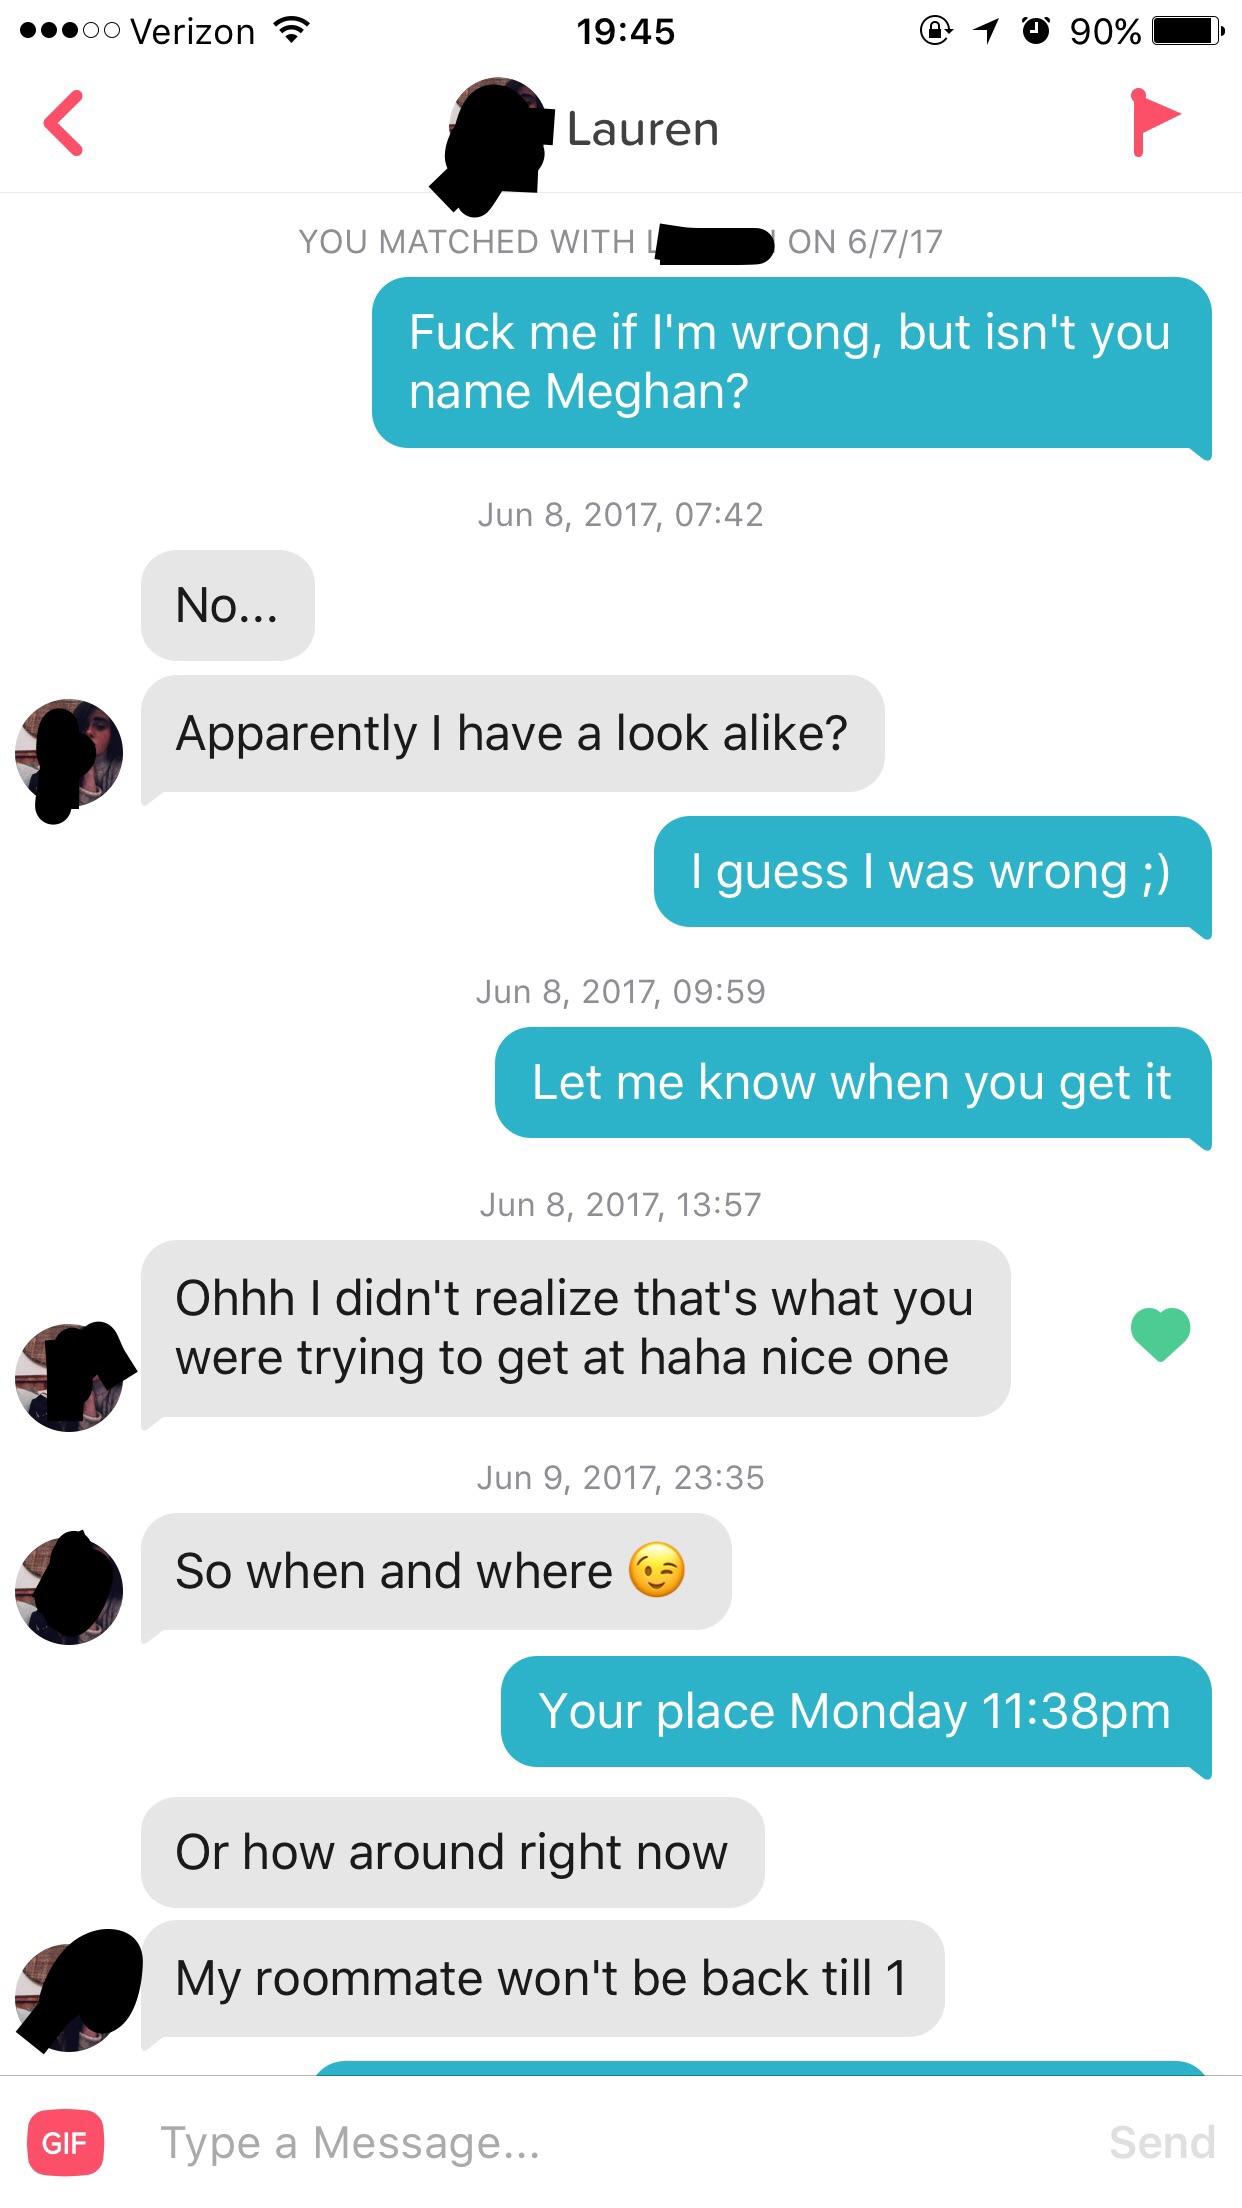 tinder wins tinder fails - 00 Verizon @ 1 90% Lauren You Matched With On 6717 Fuck me if I'm wrong, but isn't you name Meghan? , No... Apparently I have a look a? I guess I was wrong ; , Let me know when you get it , Ohhh I didn't realize that's what you 